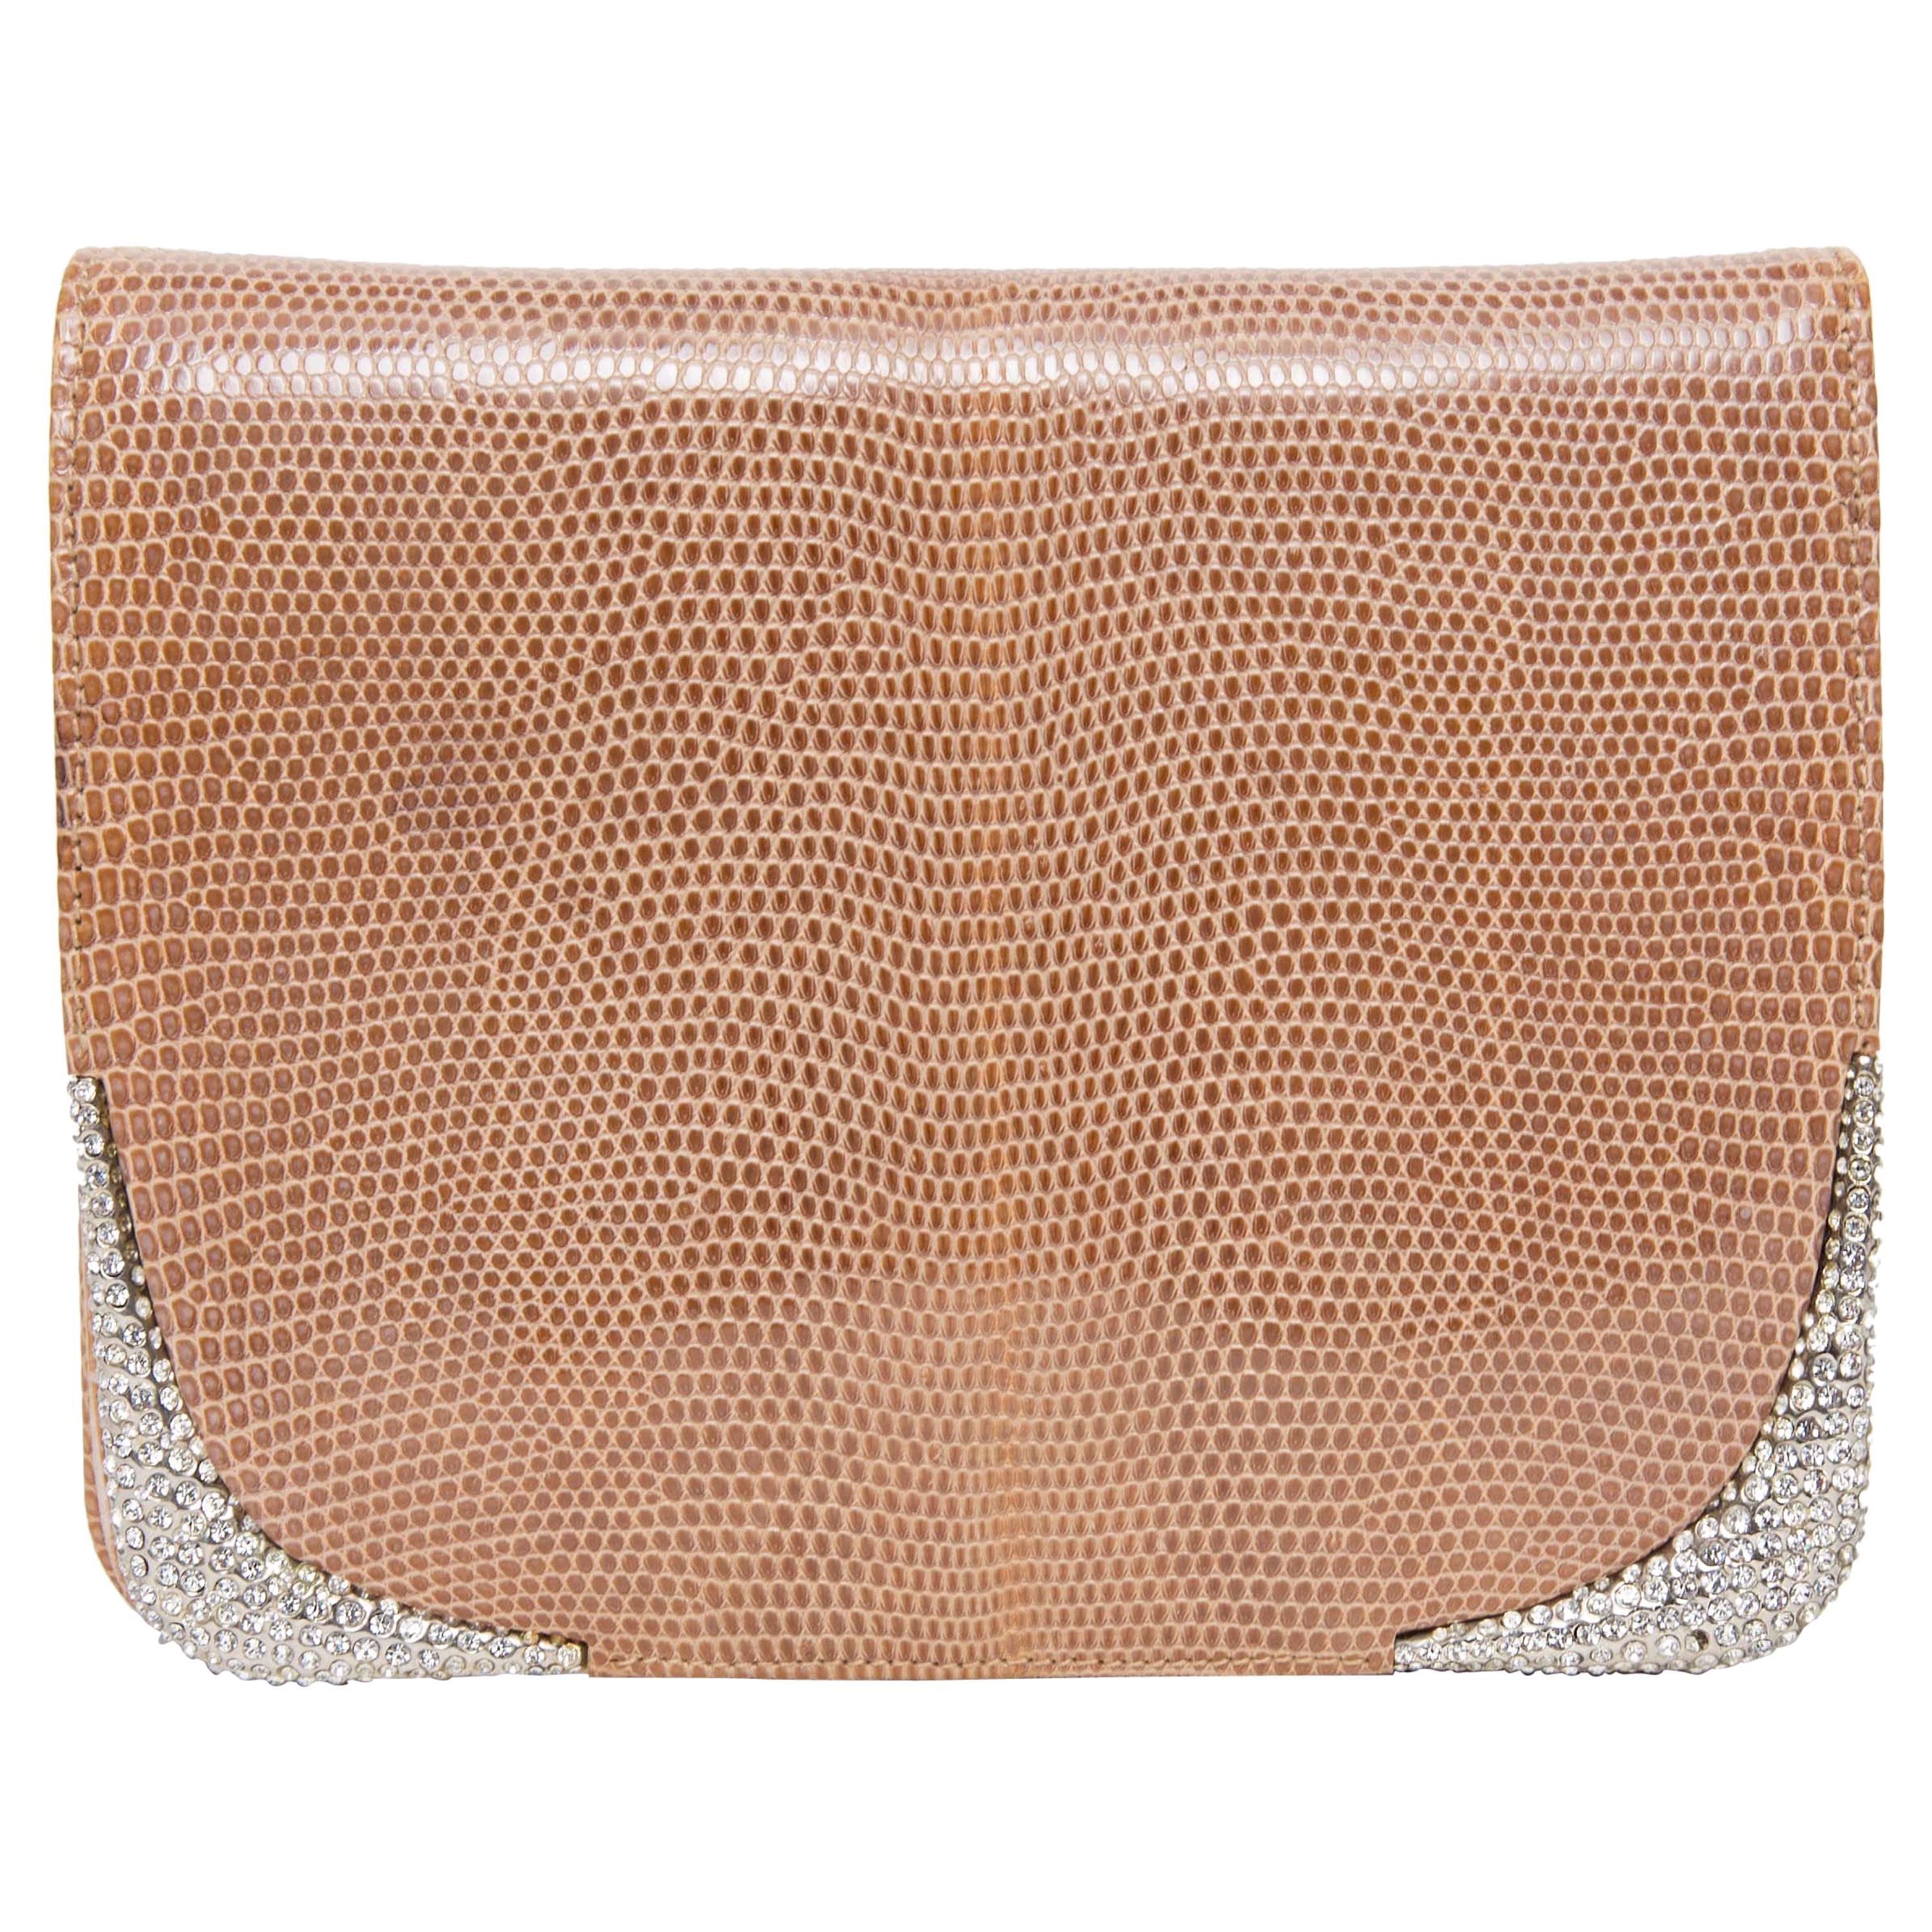 Valentino Tan Lizard Clutch with Crystal Corners and Crystal Studded Strap